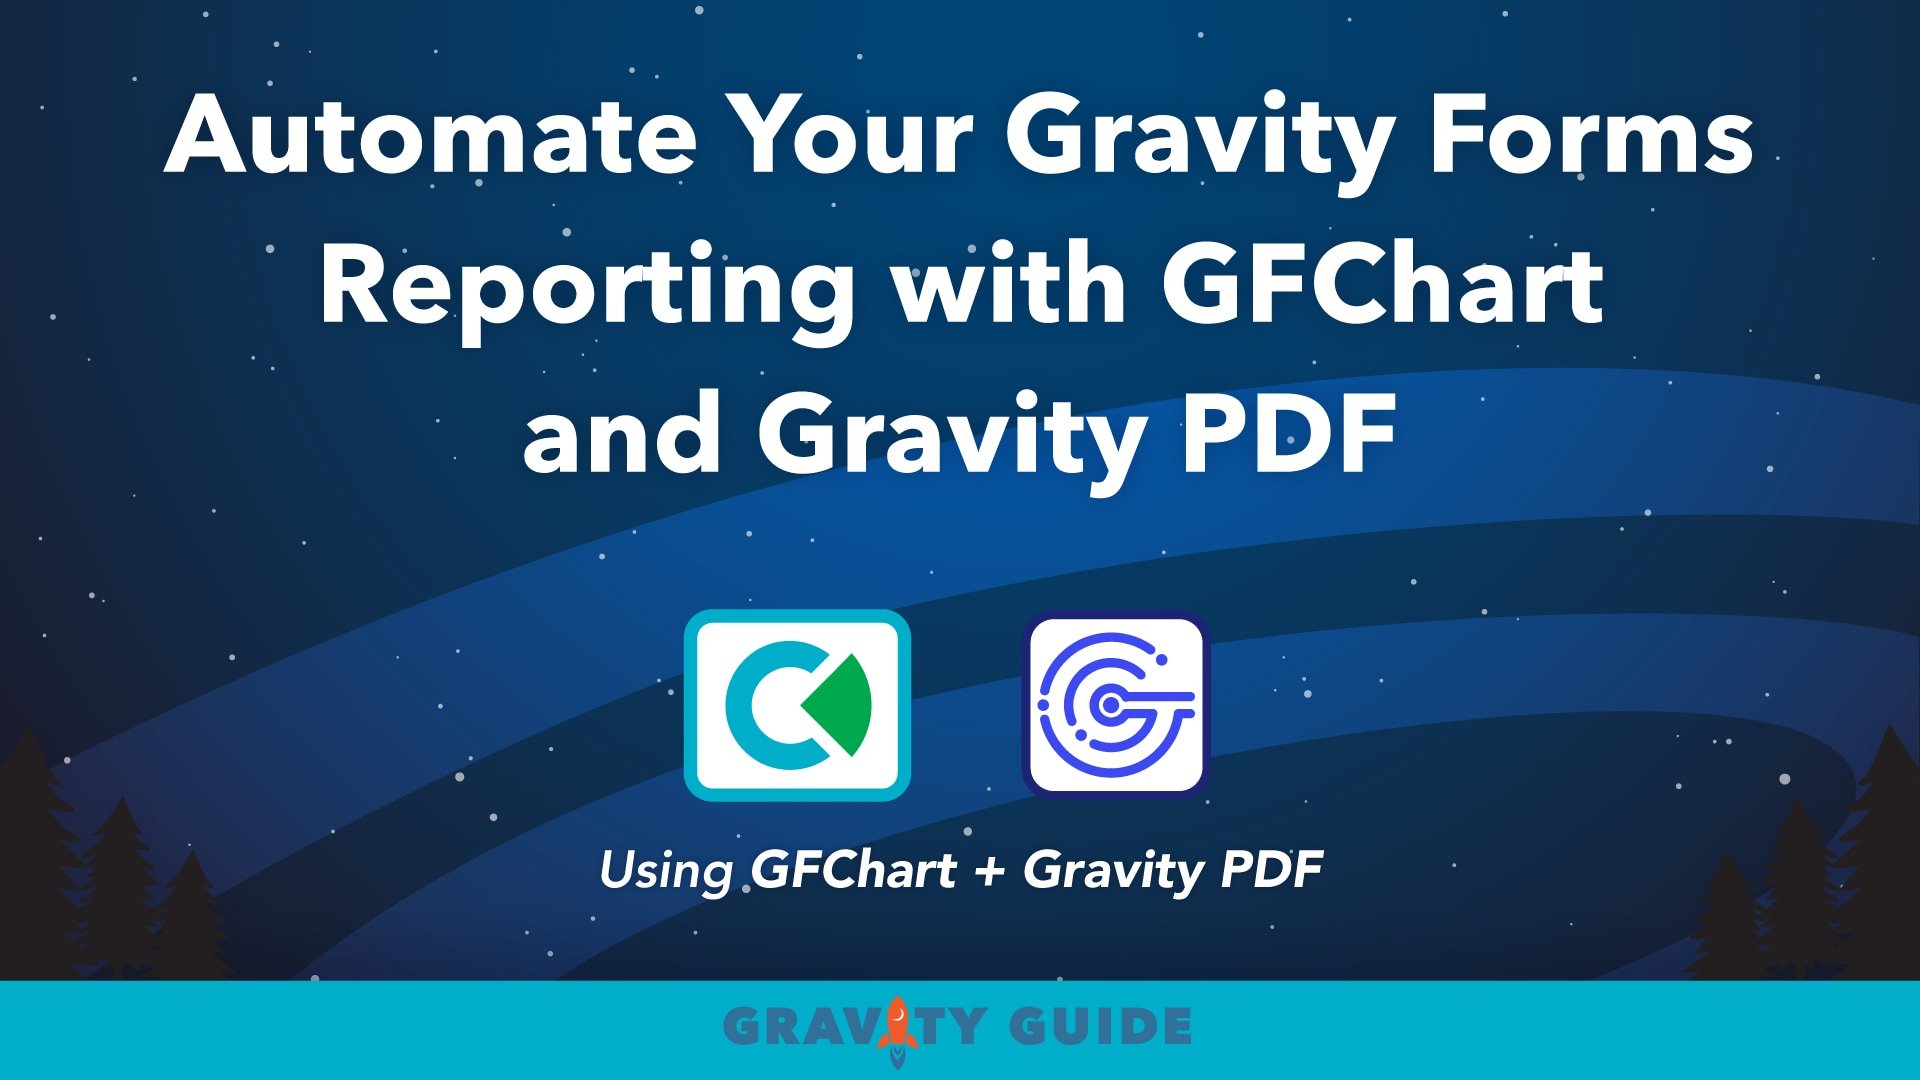 Automate Your Gravity Forms Reporting with GFChart and Gravity PDF